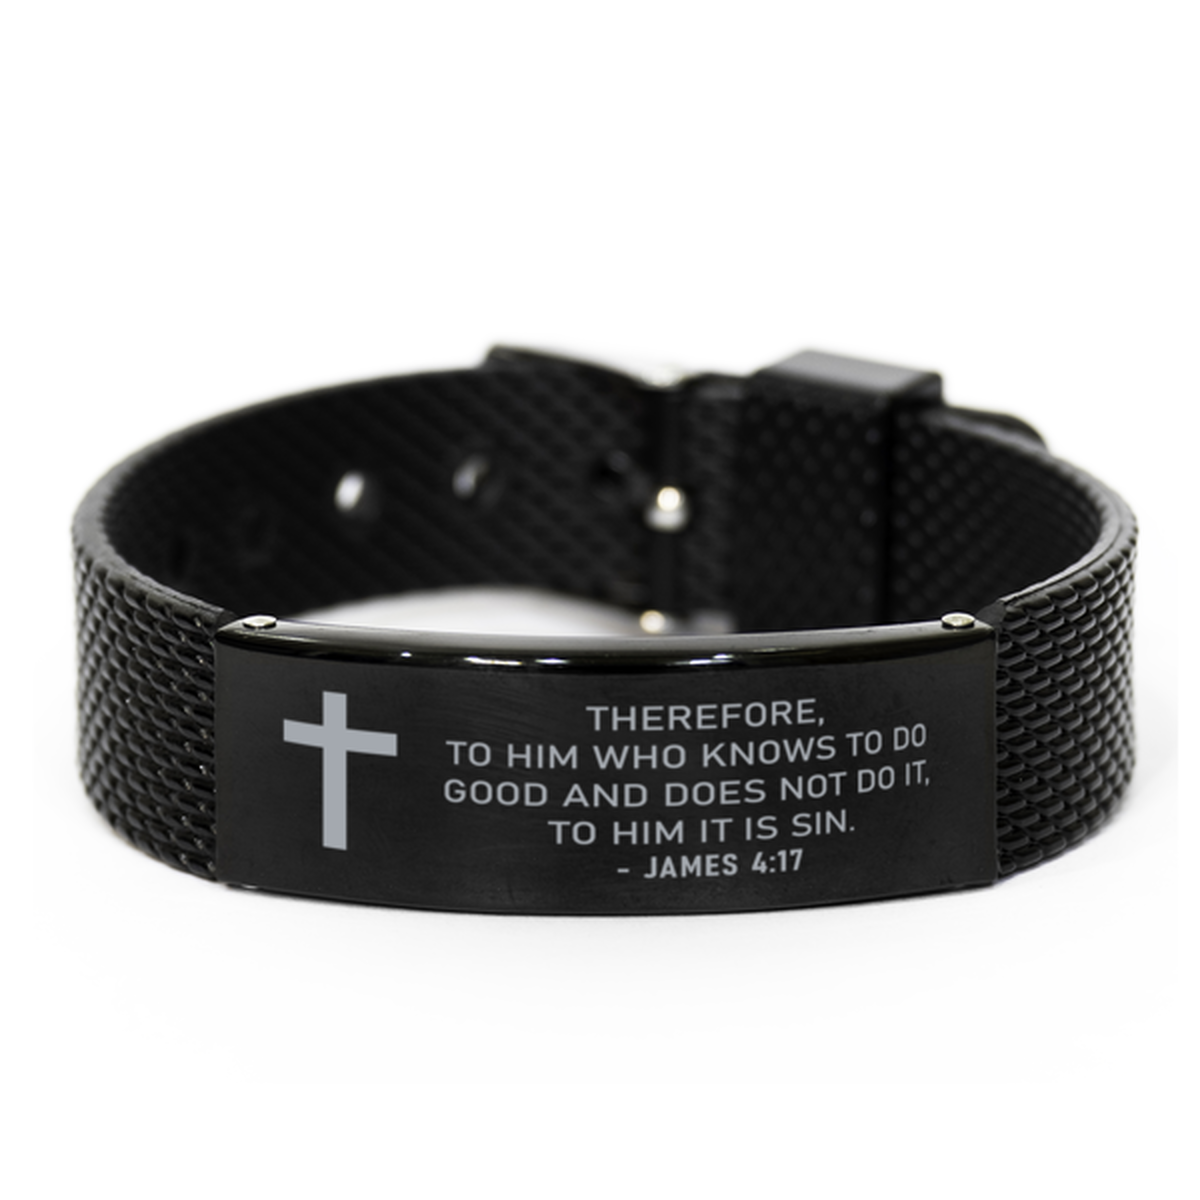 Christian Black Bracelet,, James 4:17 Therefore, To Him Who Knows To Do Good And Does, Motivational Bible Verse Gifts For Men Women